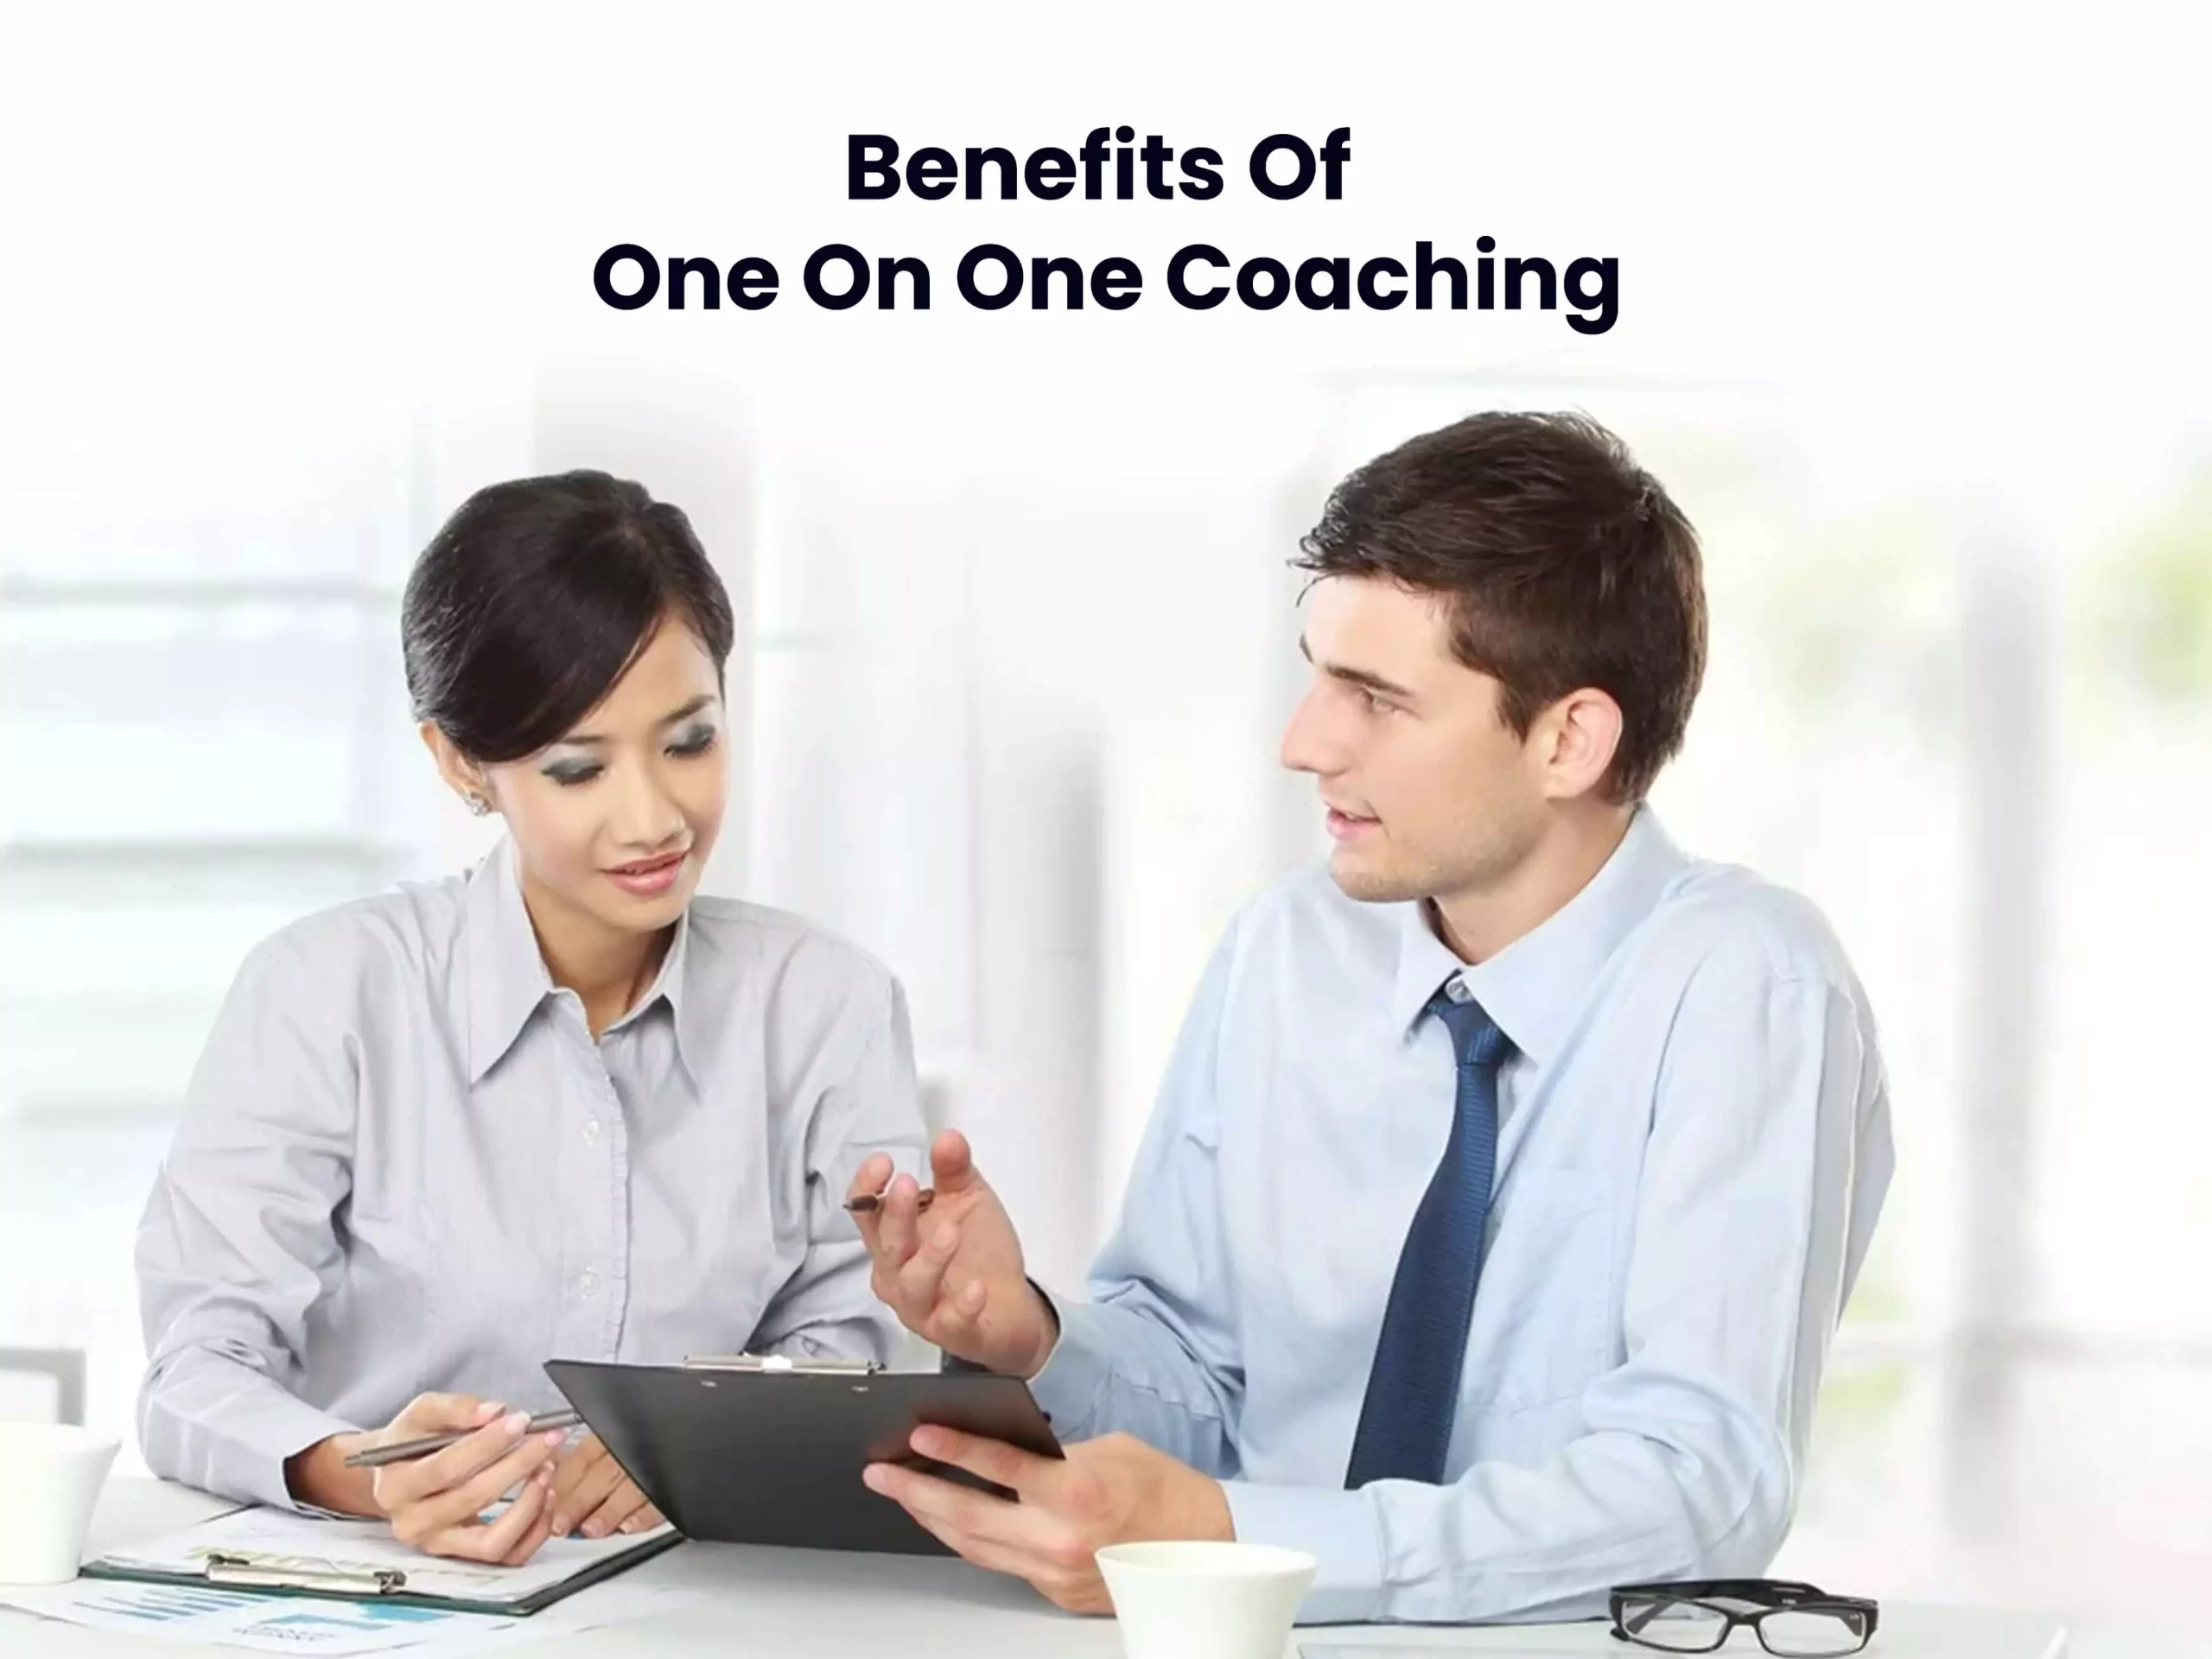 Benefits Of One On One Coaching